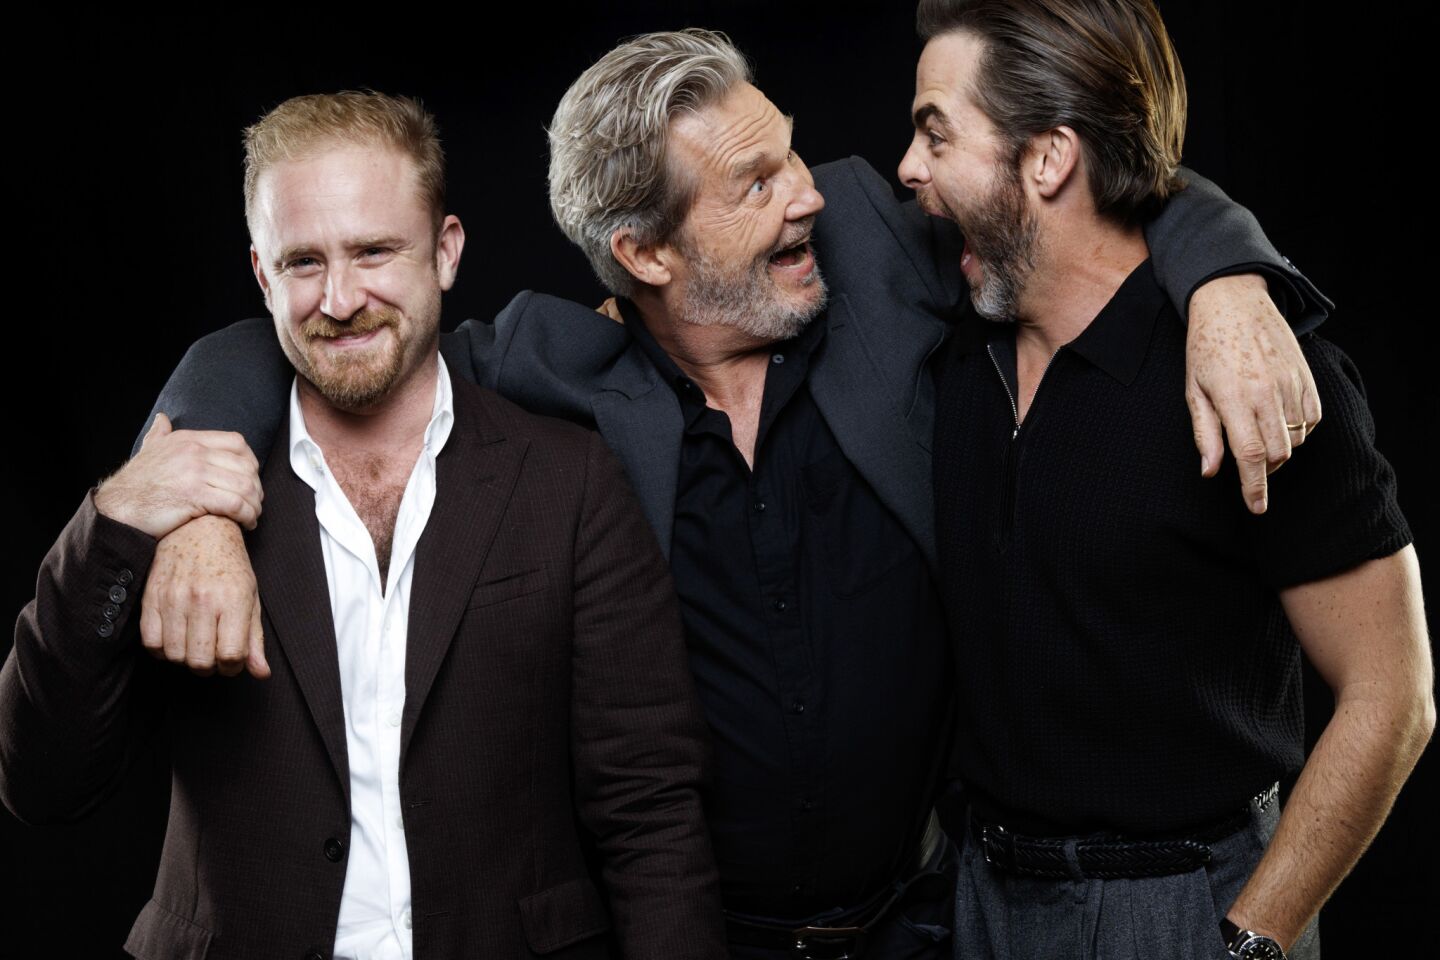 Celebrity portraits by The Times | Ben Foster, Jeff Bridges and Chris Pine